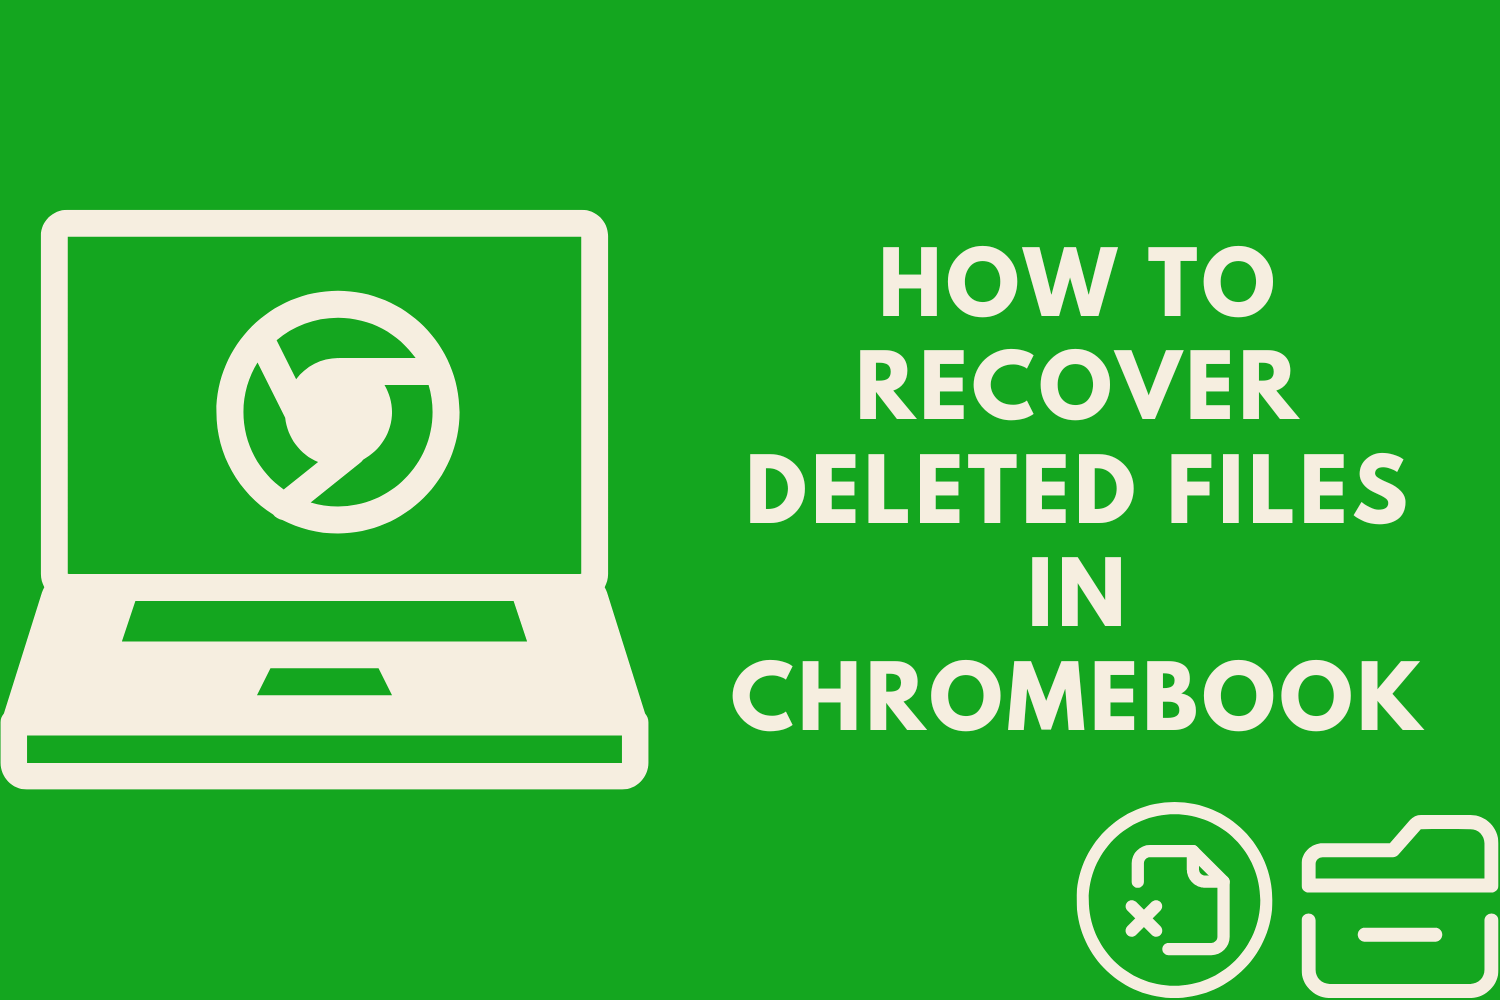 How to recover deleted files in Chromebook